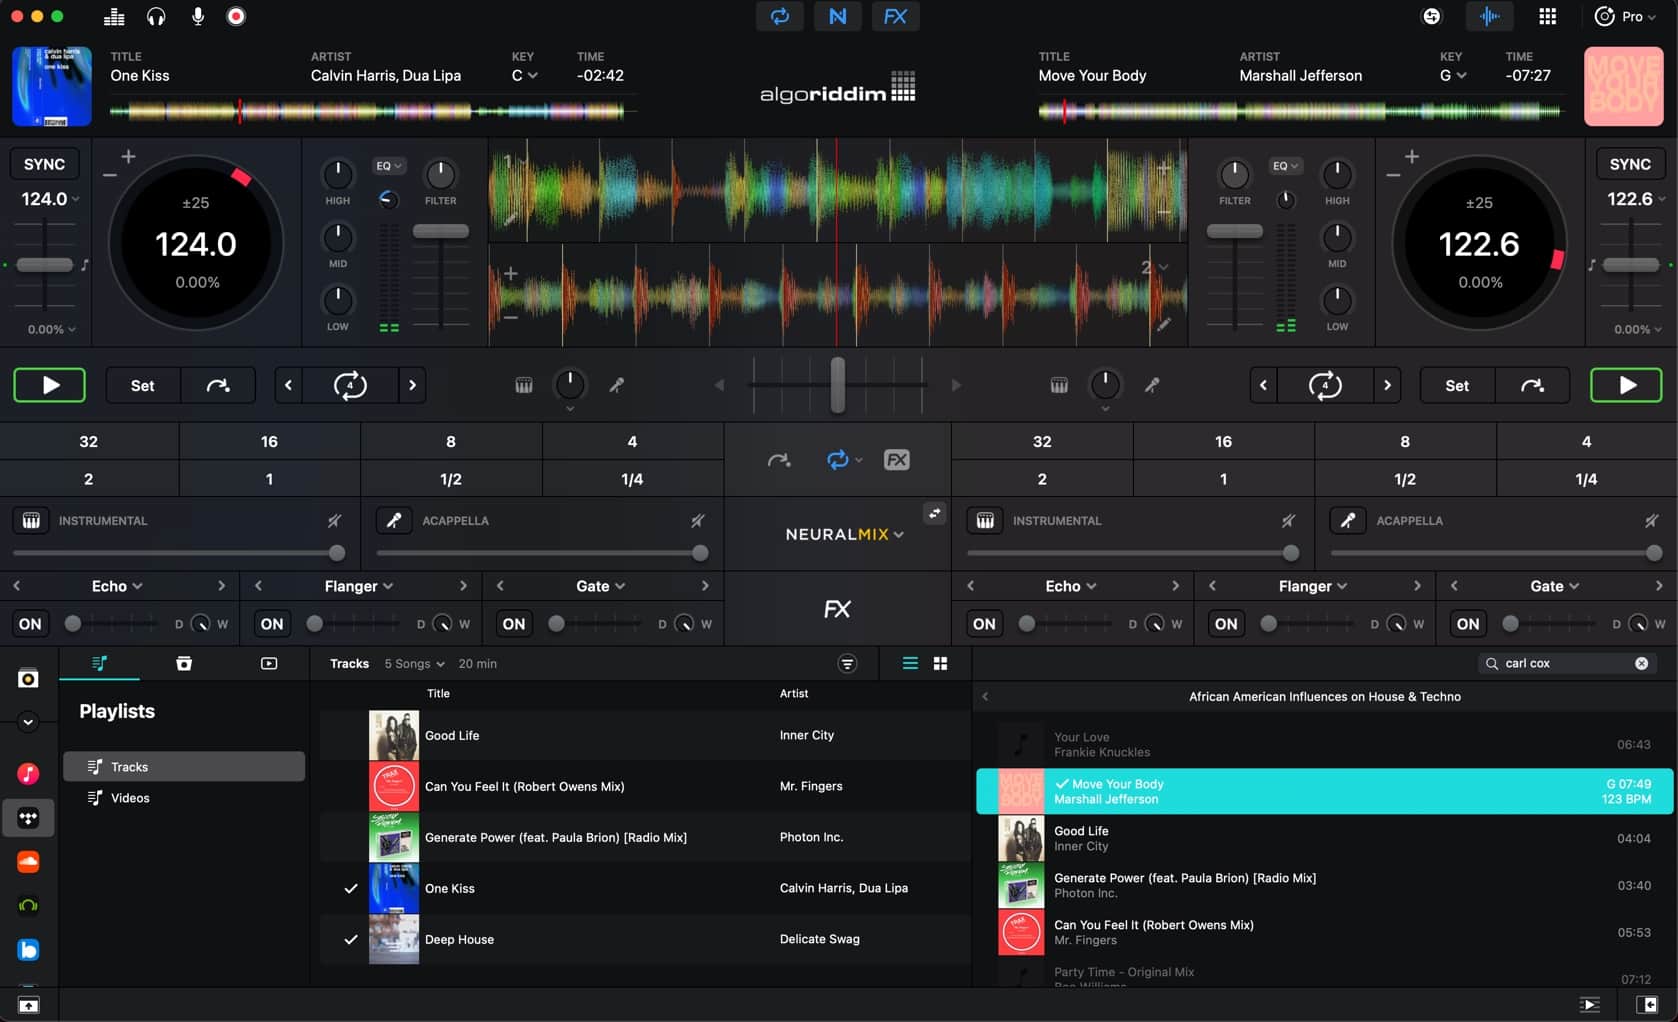 How to DJ with Tidal